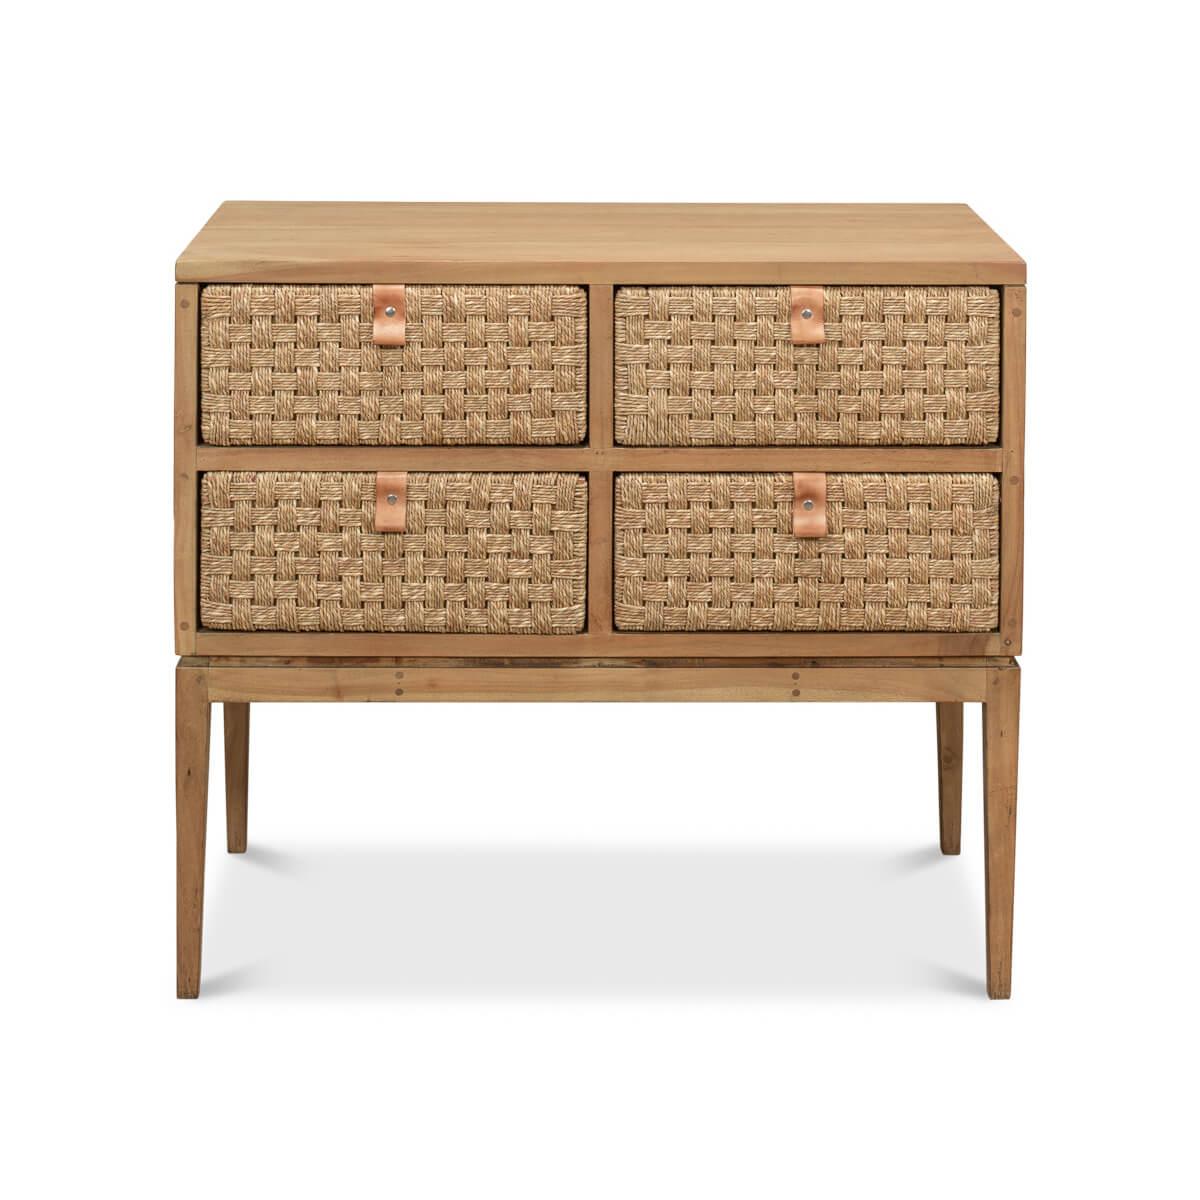 This charming piece stands out with its textural, hand-woven drawers that exude a warm, earthy vibe.

The natural wood frame and legs provide a sturdy base, while the basket-weave pattern introduces an element of tactile appeal. Leather pull handles